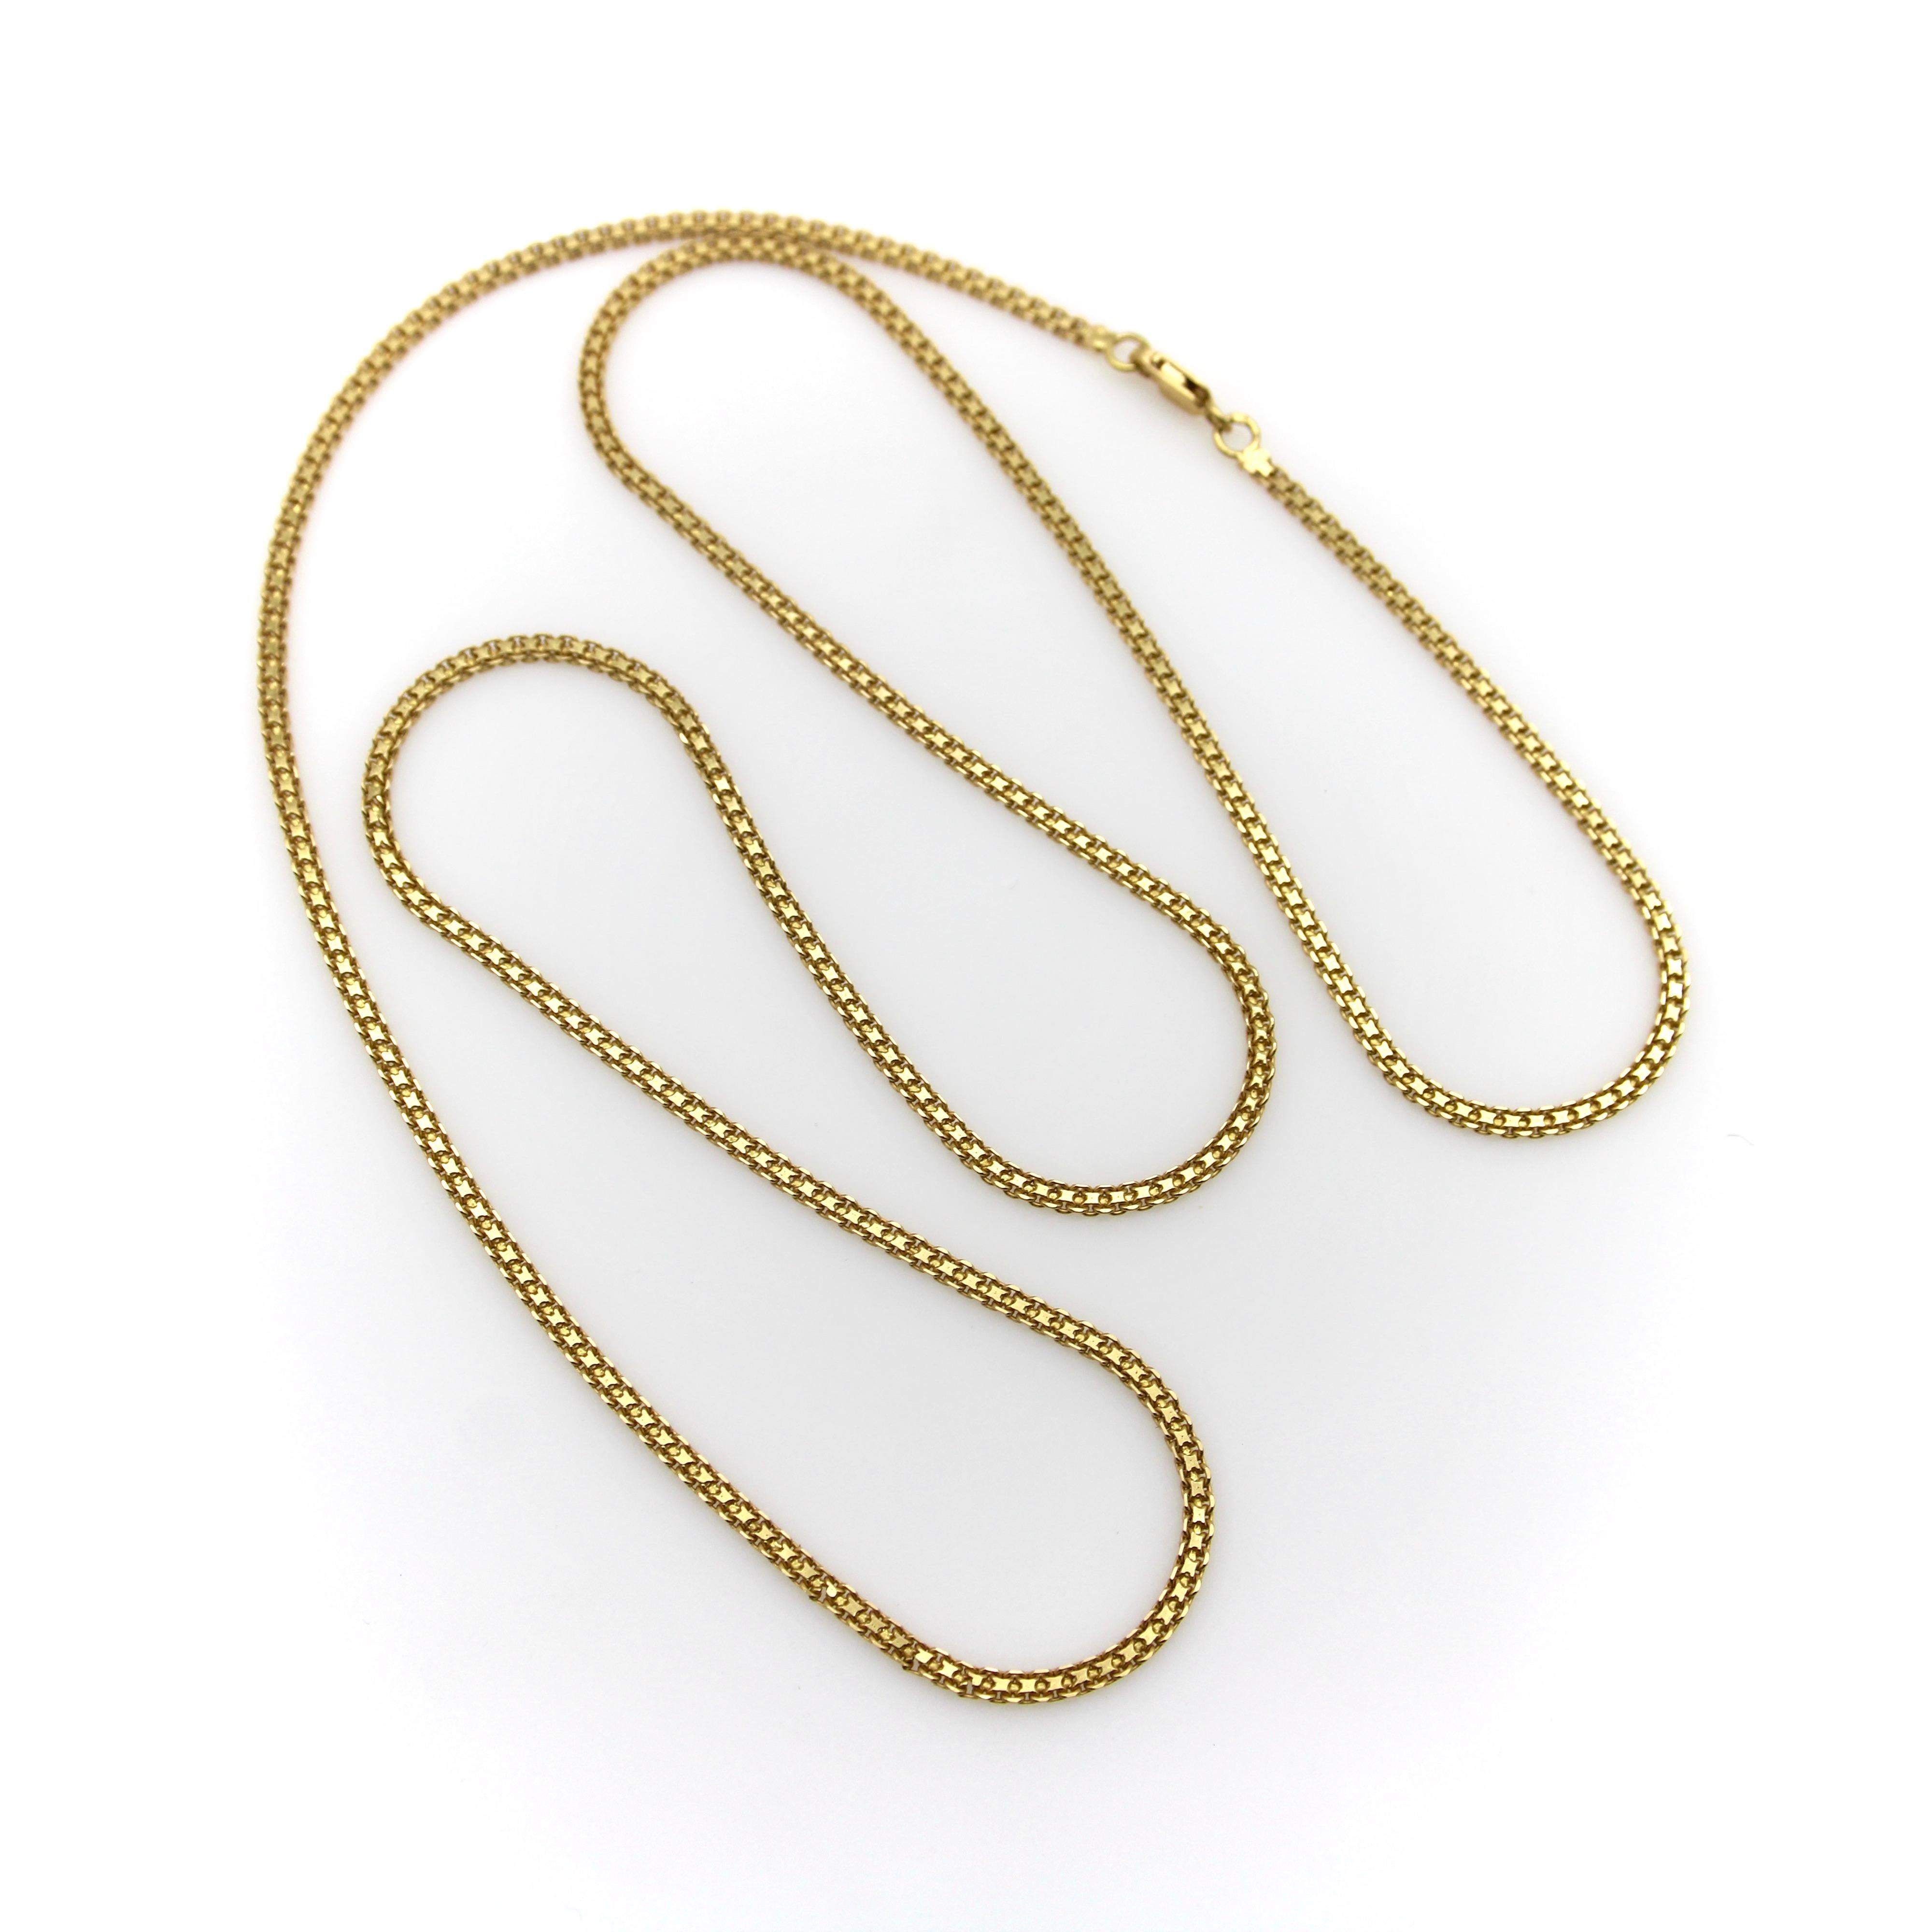 This gorgeous handmade necklace consists of a flattened double Bismark link in a warm 22k gold. The extra long chain has a classic design and the deep buttery golden tone that higher karat gold is known for. The Bismark link is made from layered